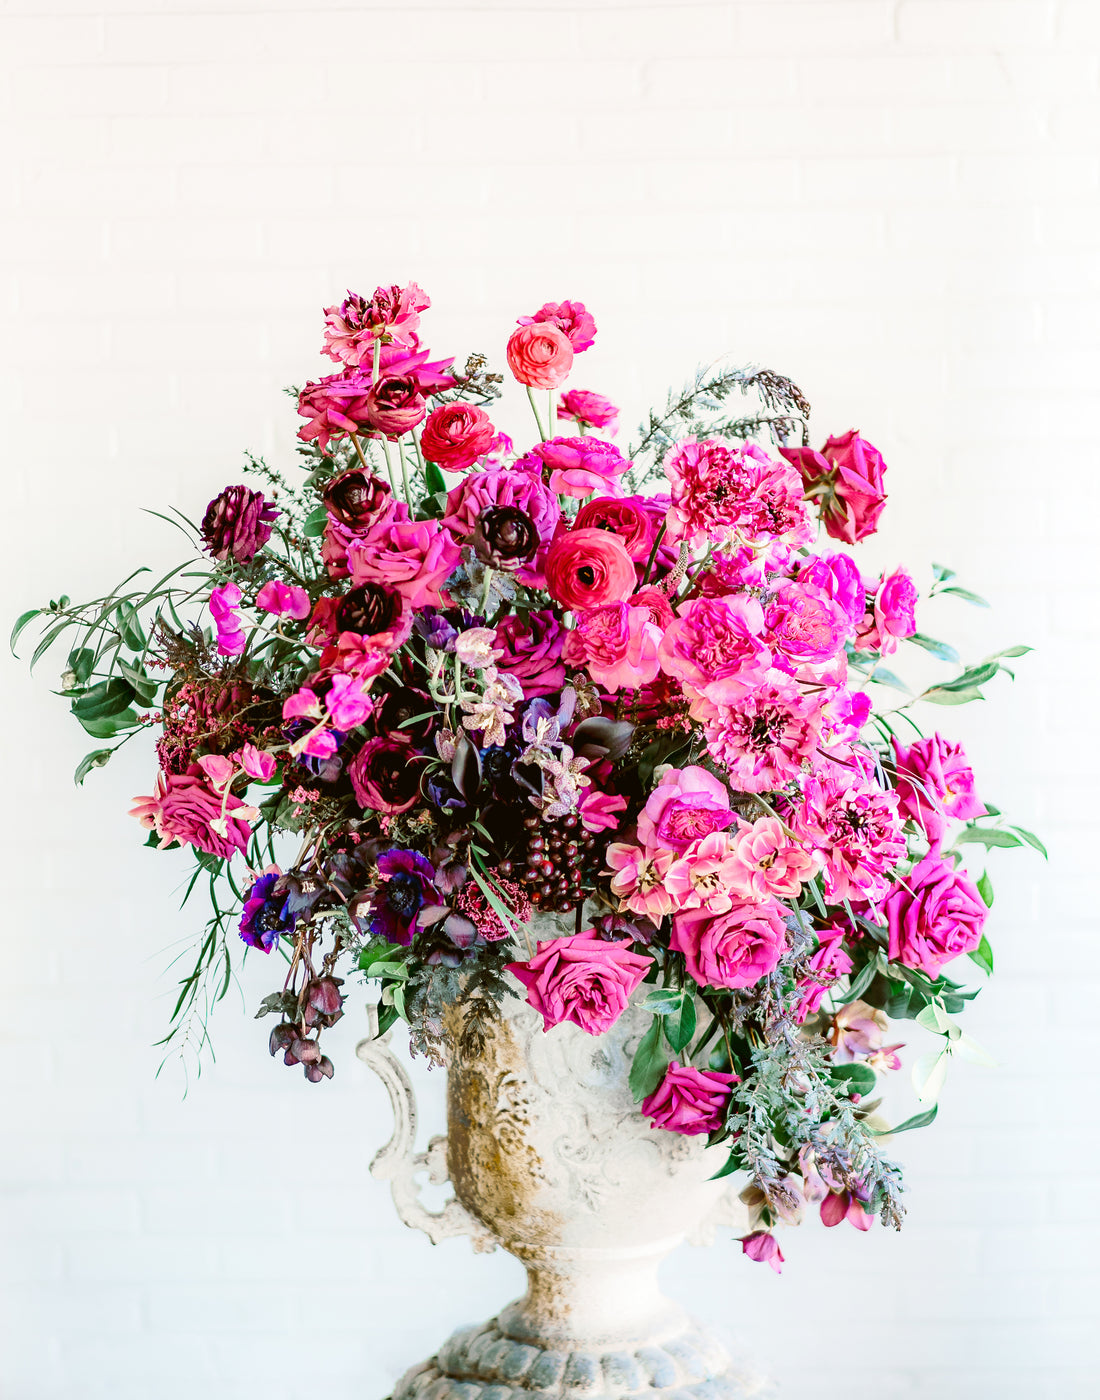 A Vibrant Spring Arrangement With A Fresh Flower Story and The Dreamy Details Of A Flower Inspired March Madness Tournament